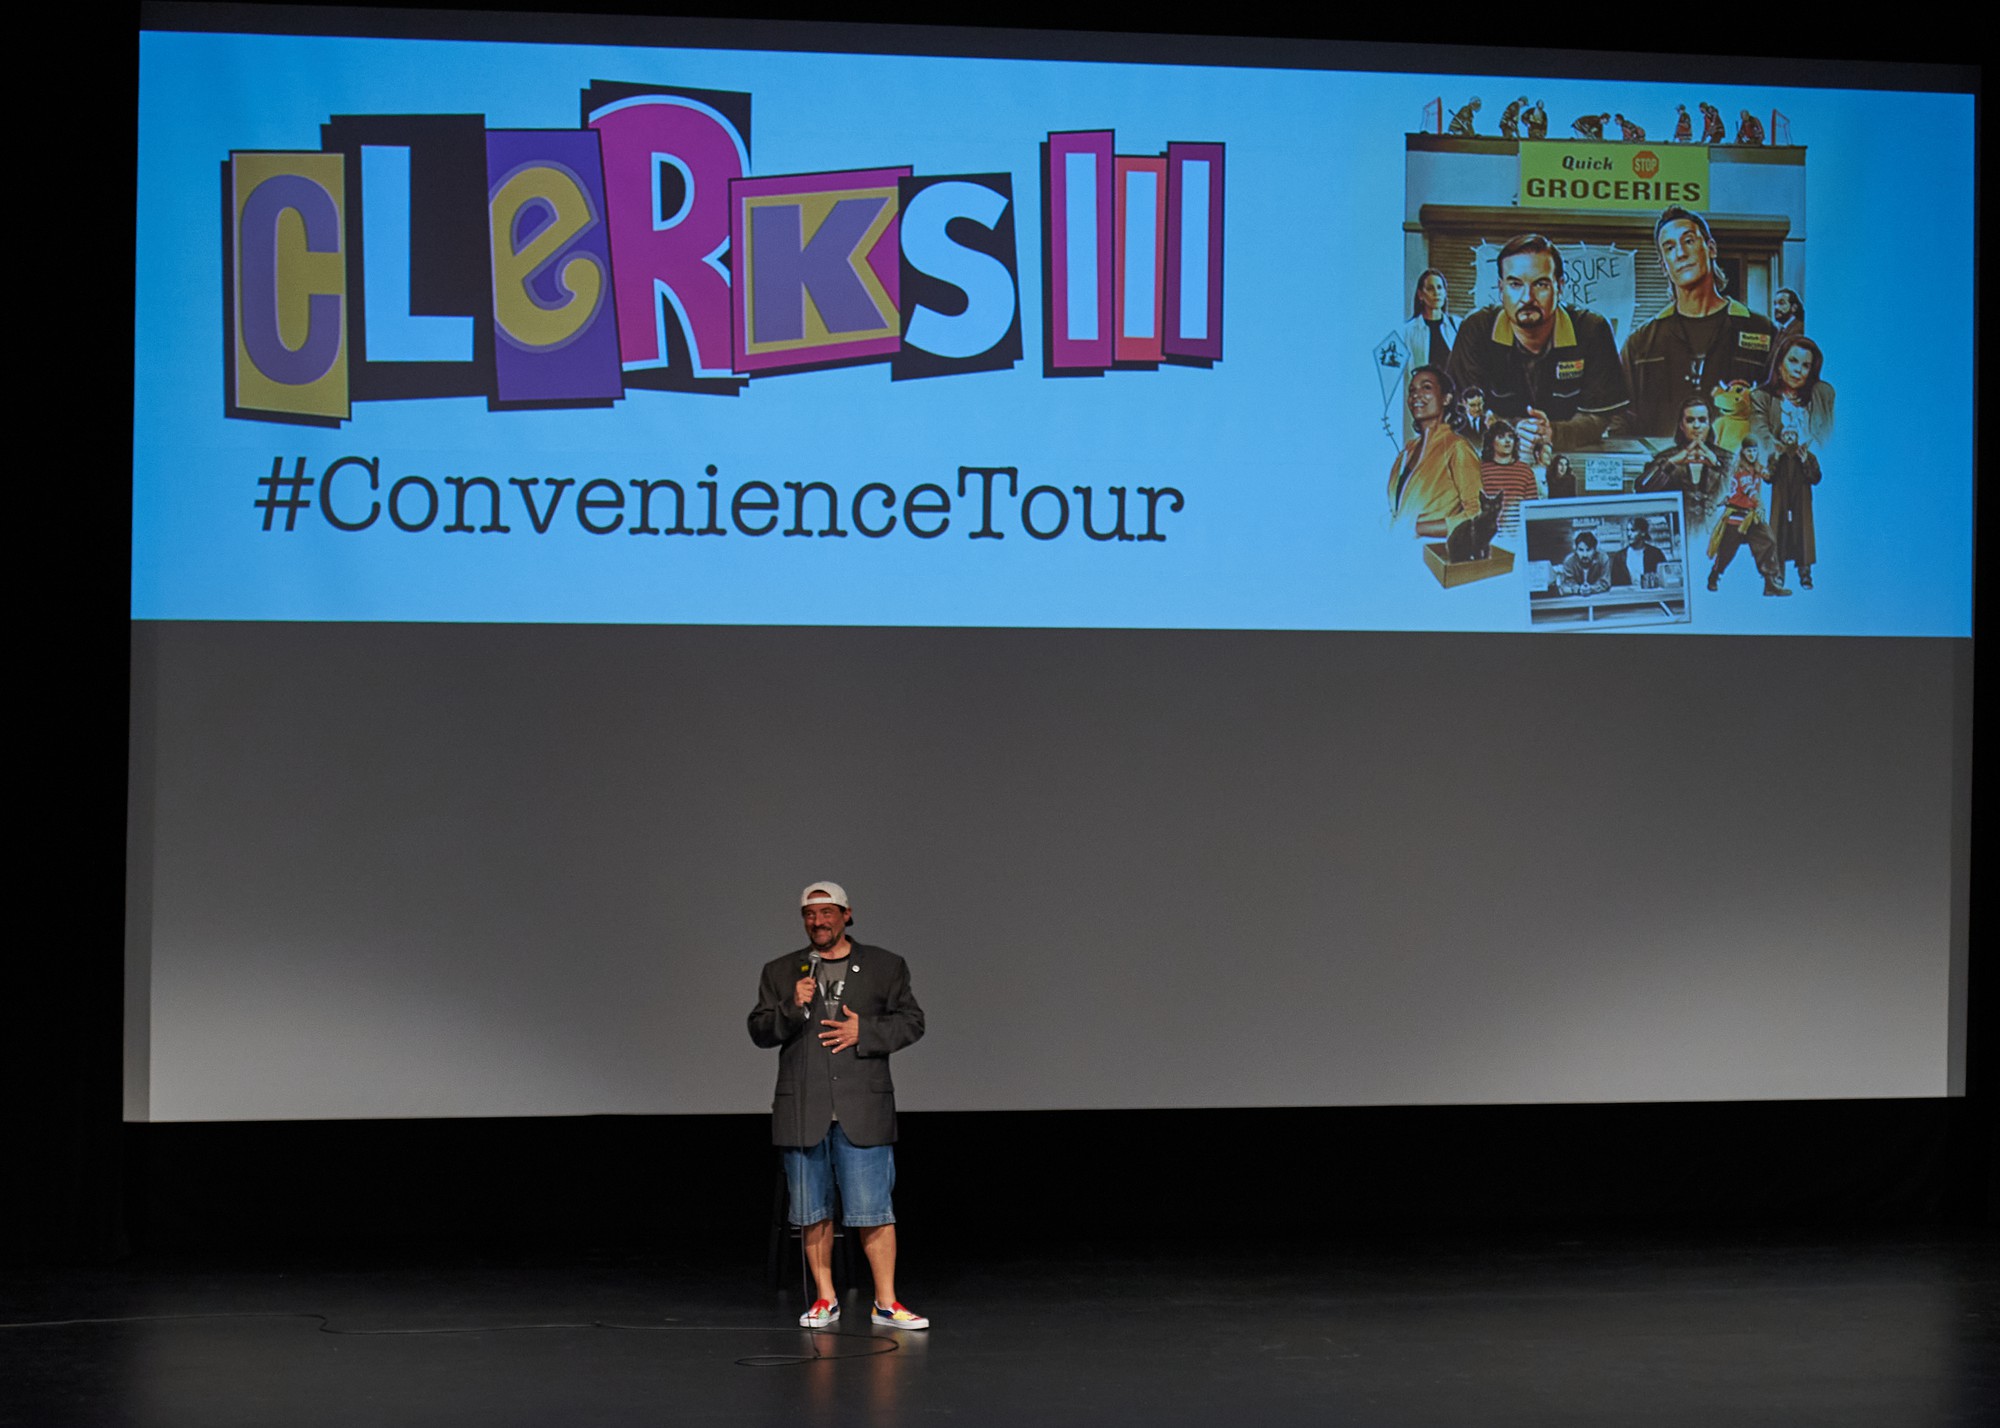 Kevin Smith gives a preview of his new movie, Clerks III. He also held a Q & A with the audience after the screening.